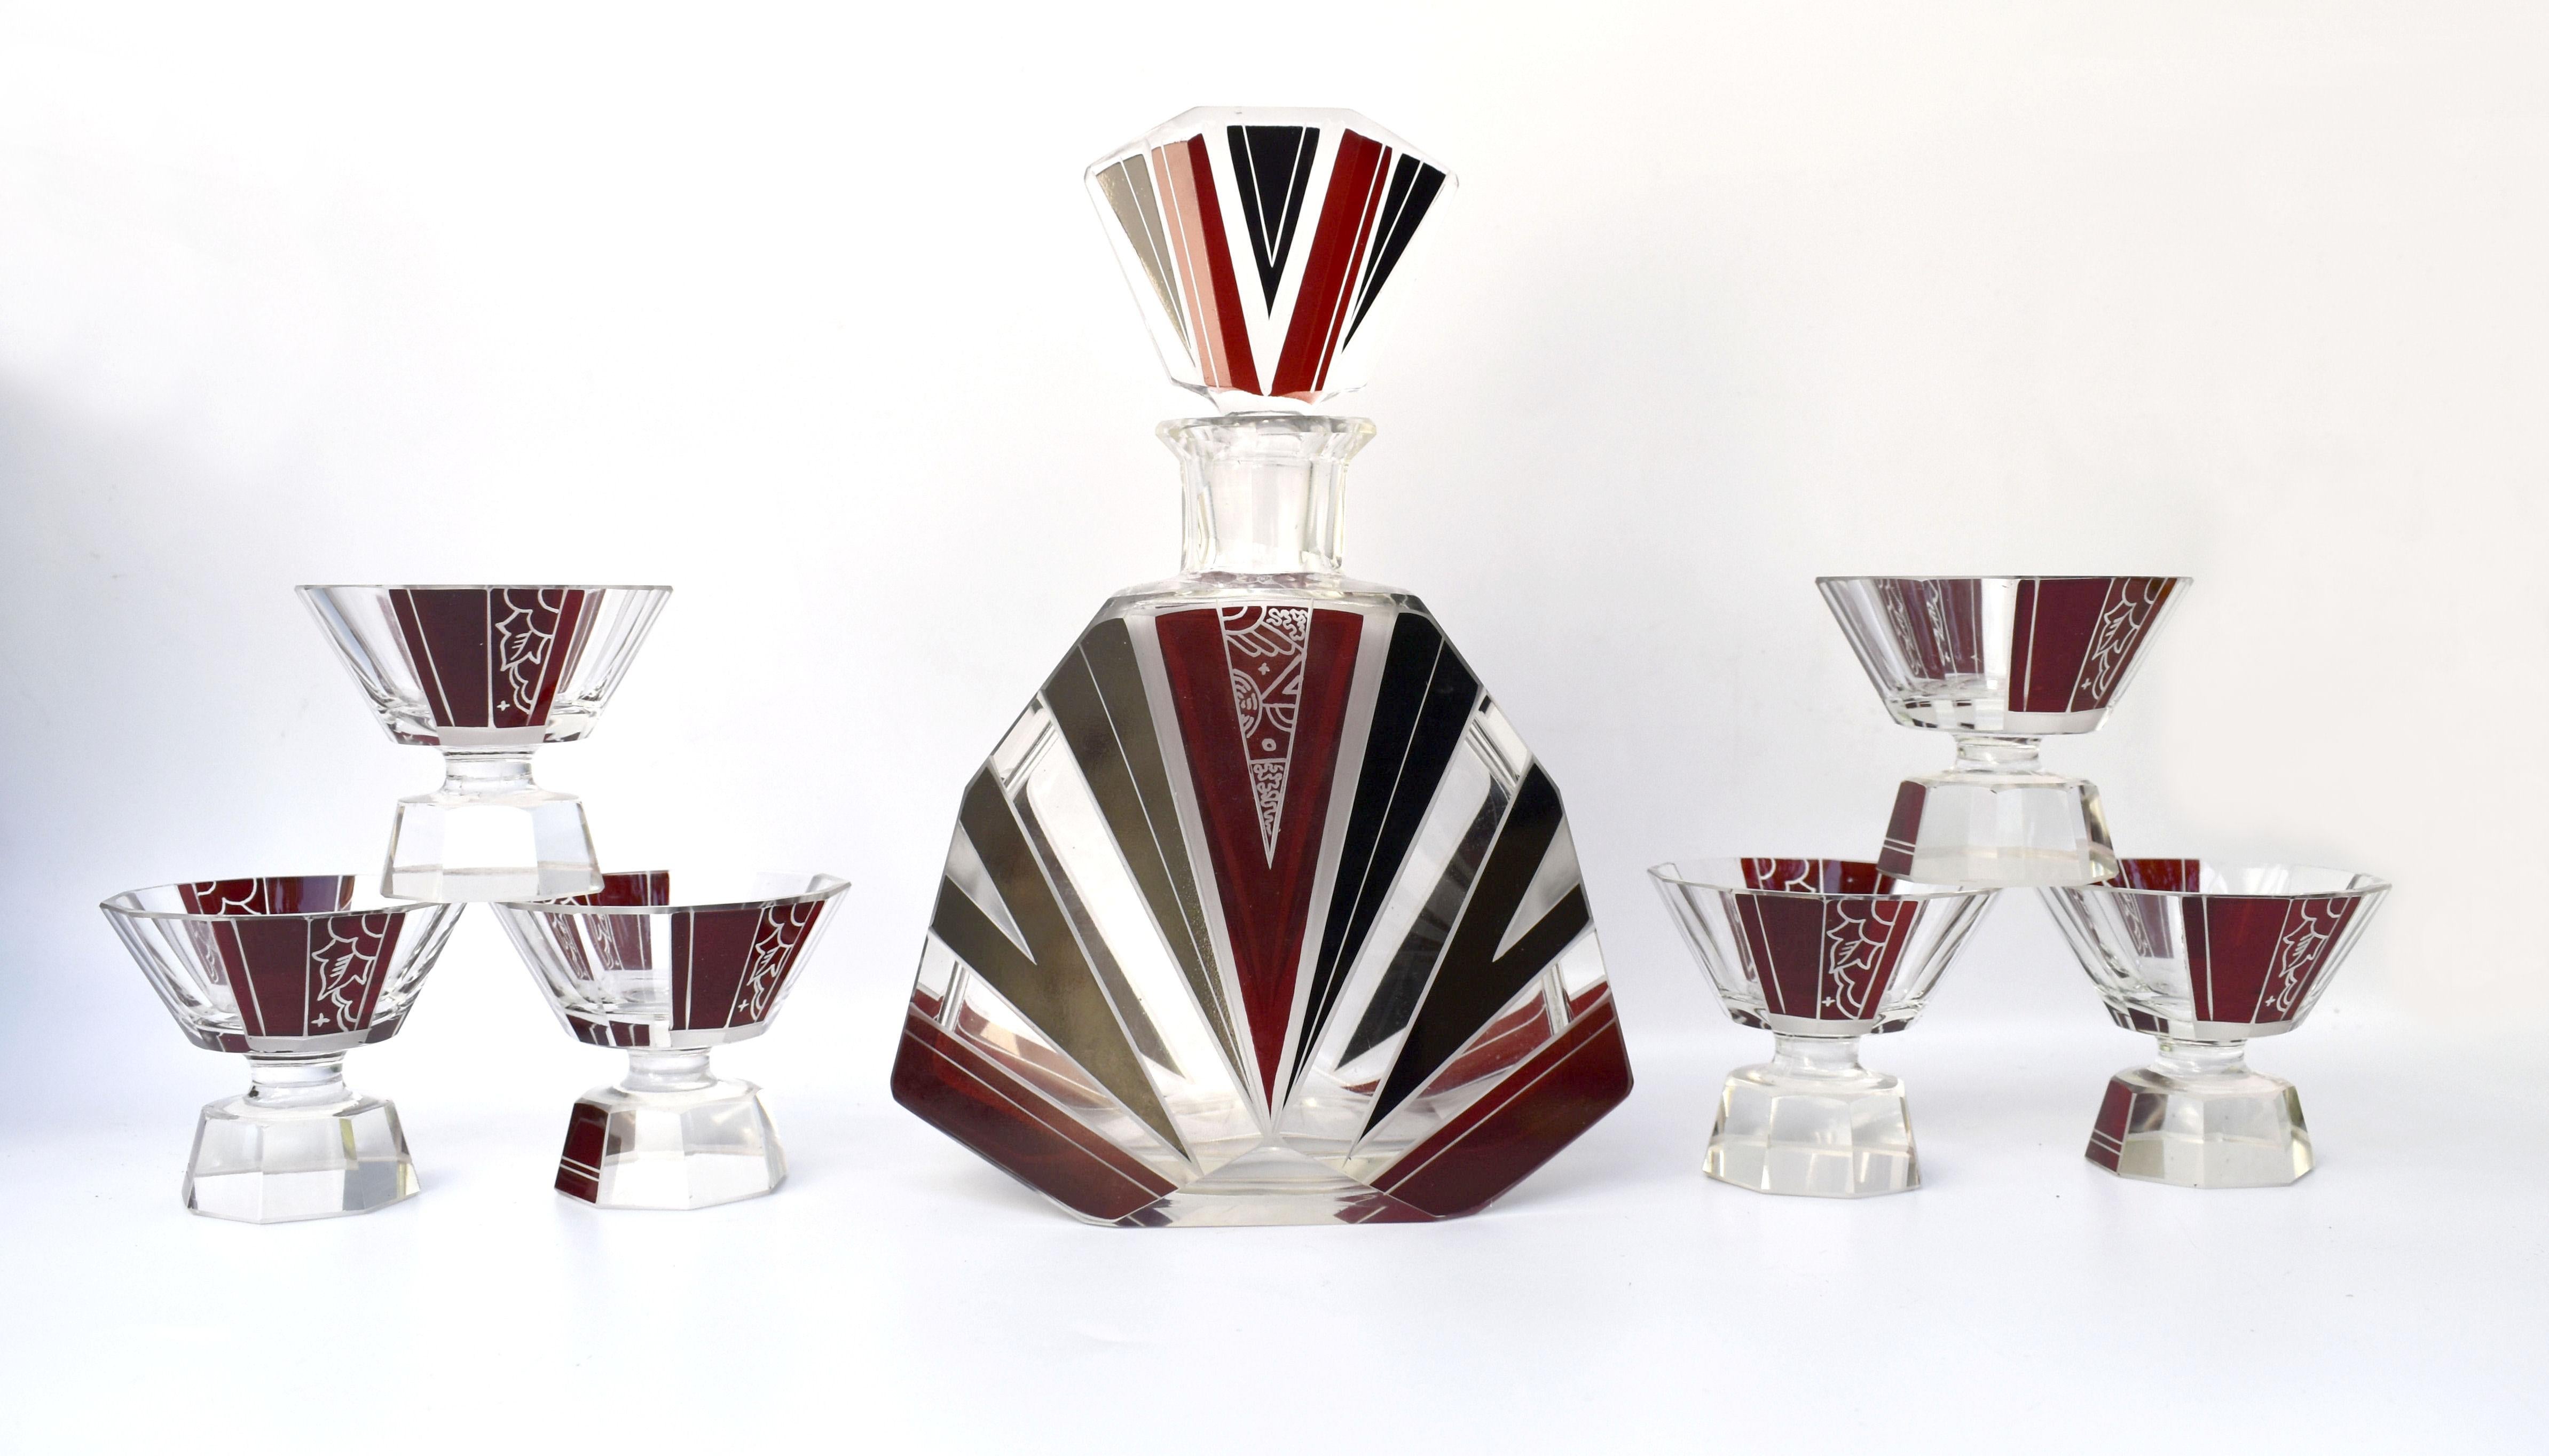 Totally authentic and wonderfully stylish 1930's Art Deco decanter set. Comprises a large decanter and six matching glasses. This fabulous set exudes quality as soon as you hold each piece, each being deceptively heavy and wonderfully detailed. The